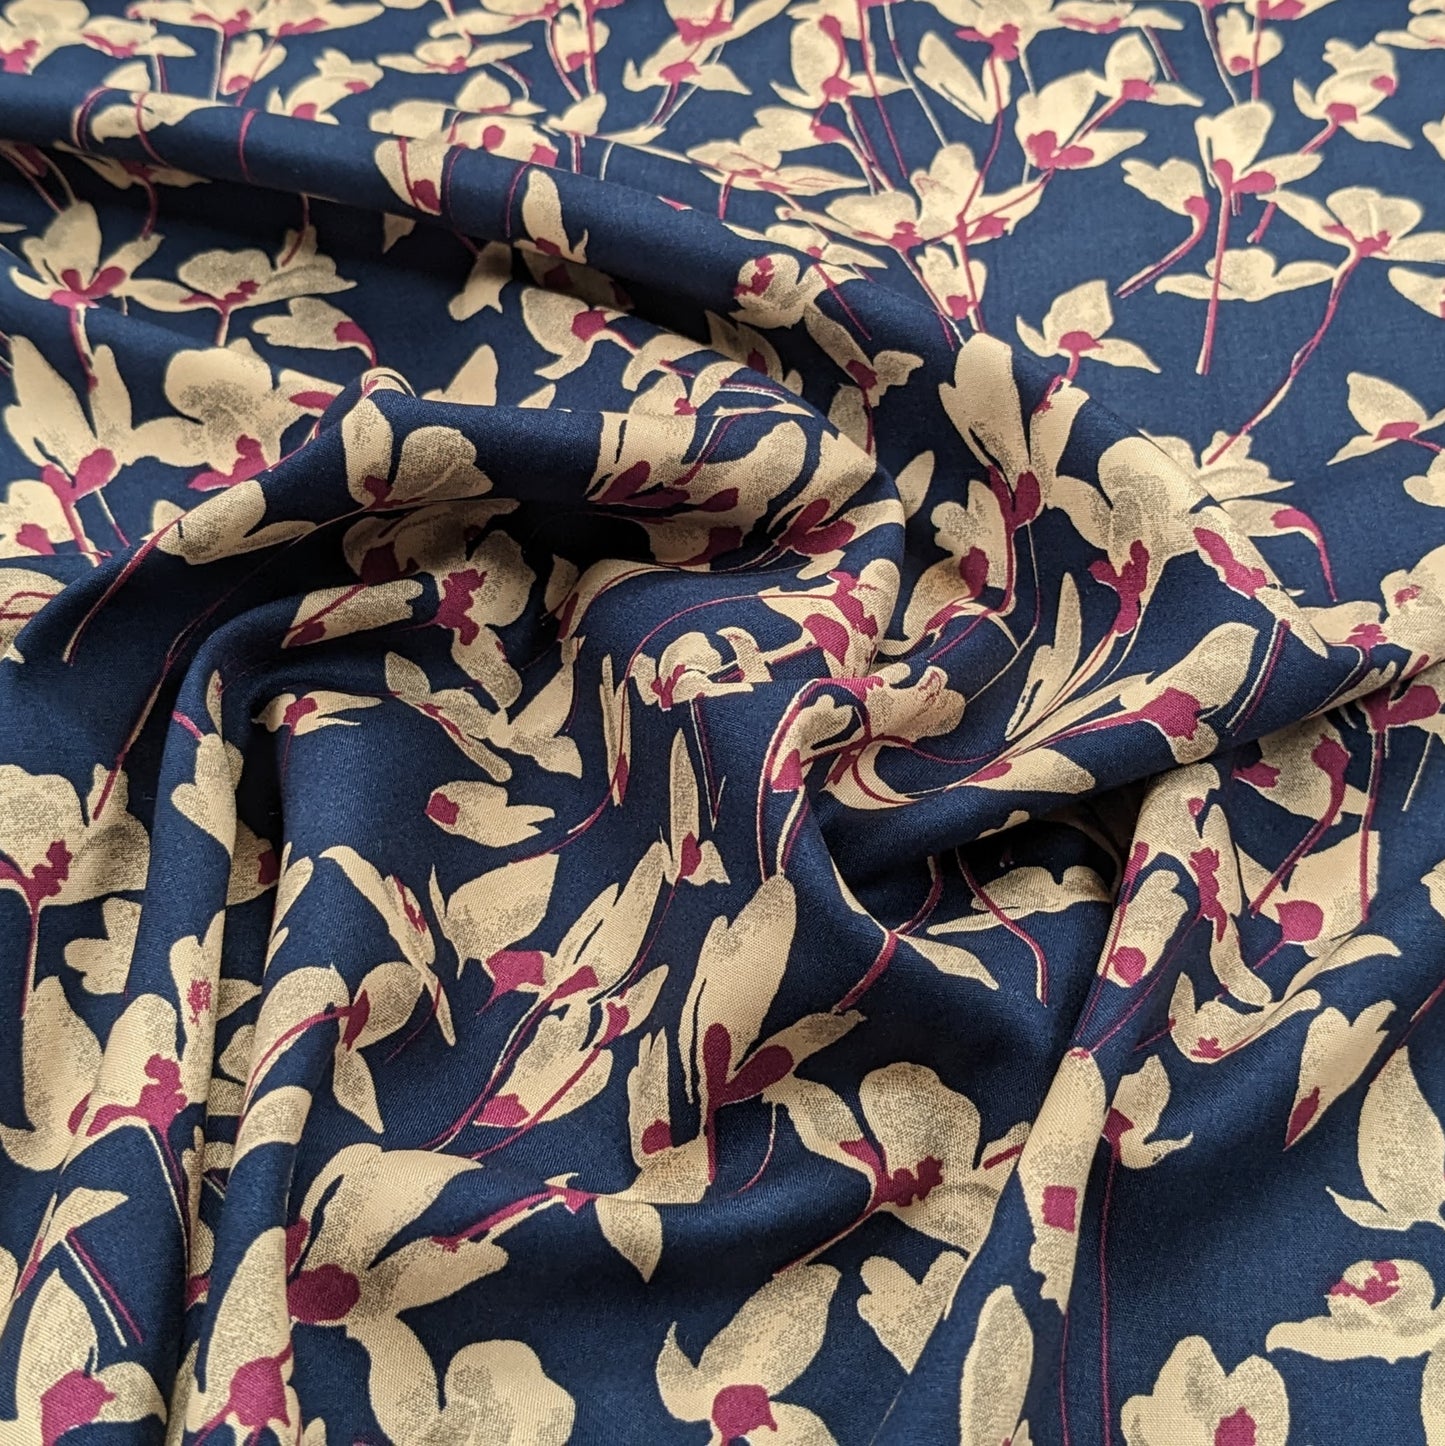 Viscose/Tencel Fabric - Navy and Plum Floral